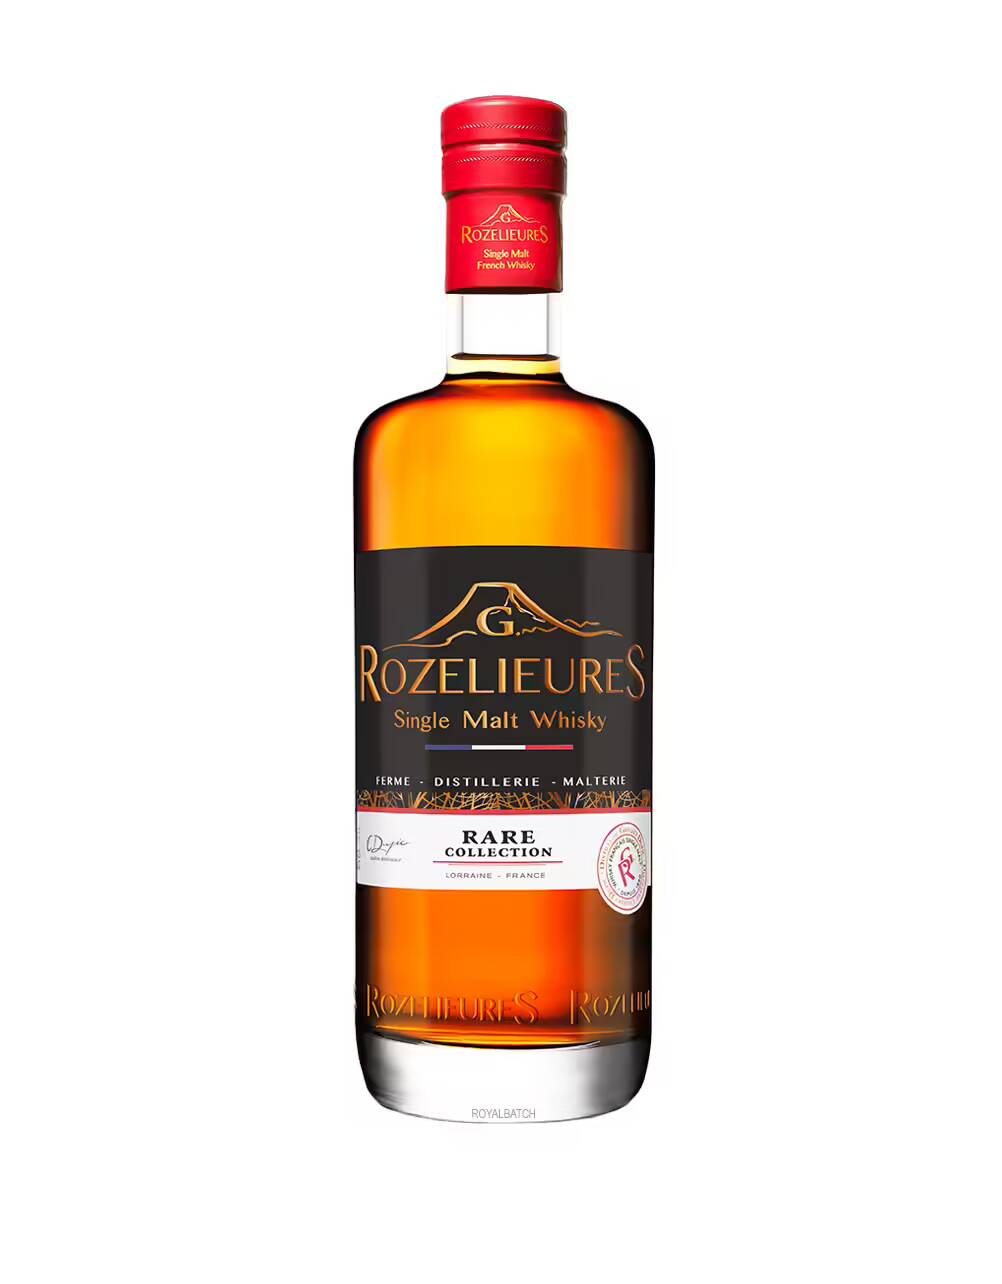 Rozelieures Rare Collection Single Malt French Whisky